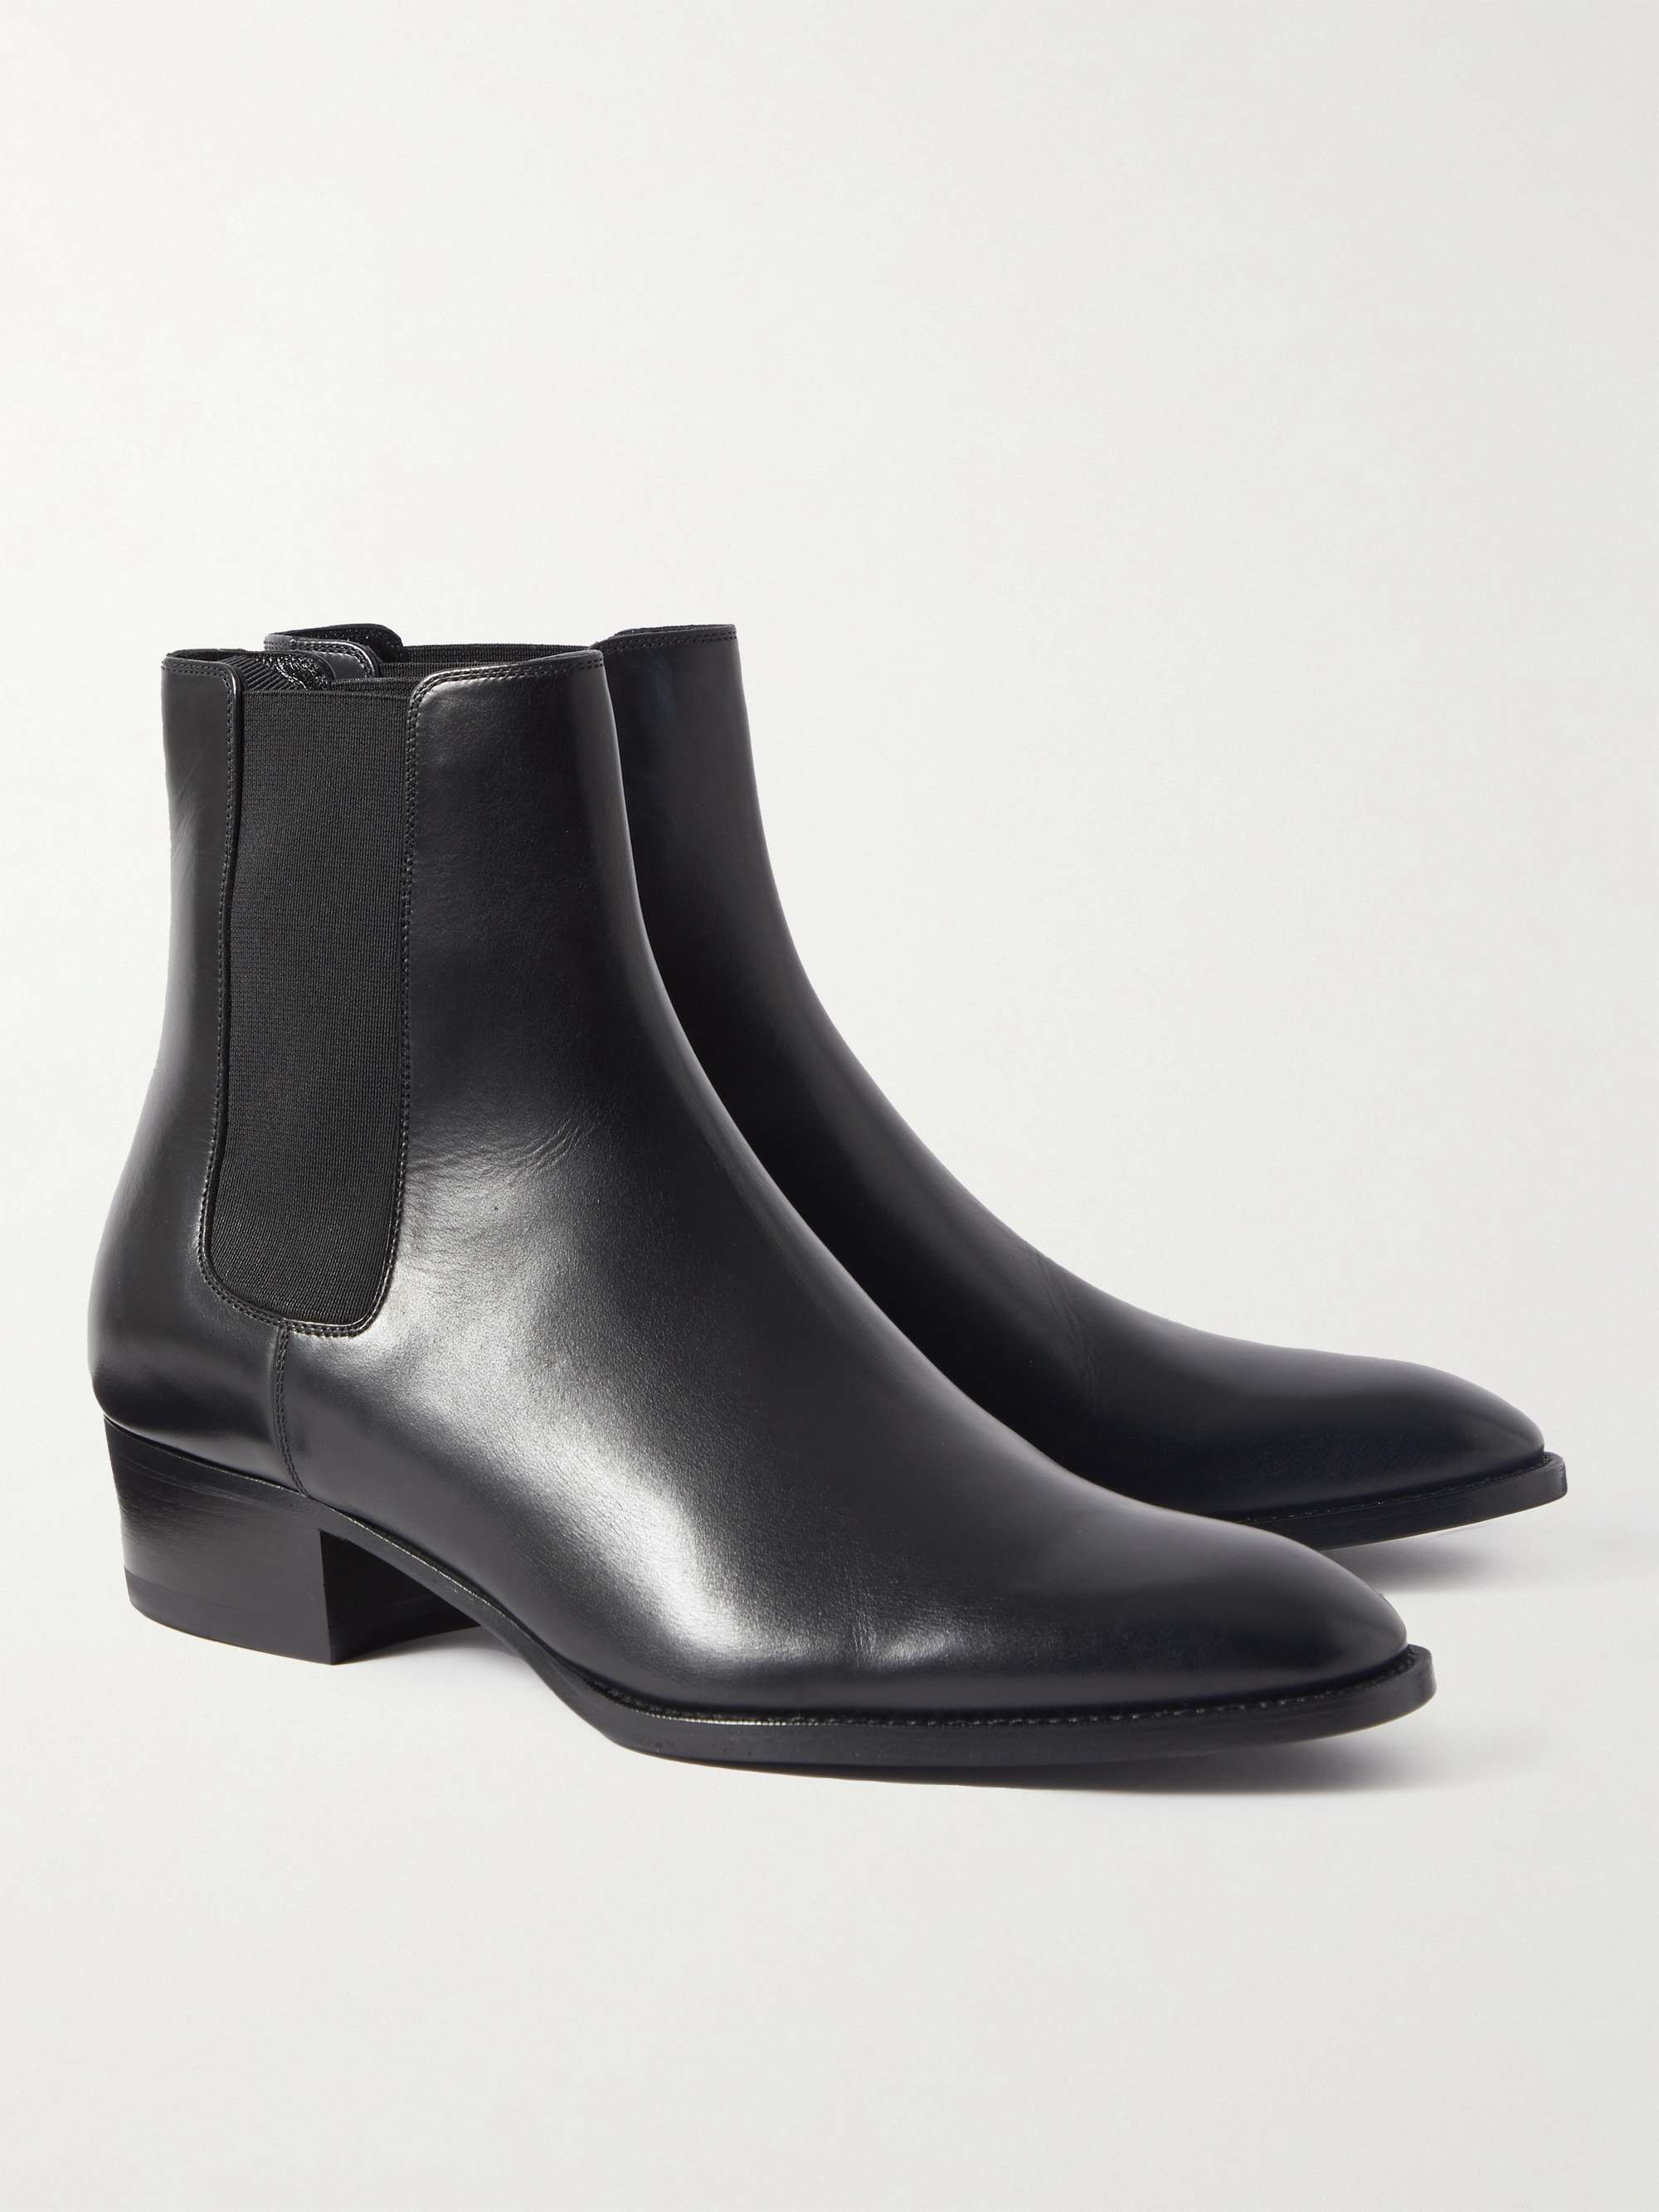 CELINE HOMME Drugstore Glossed-Leather Chelsea Boots